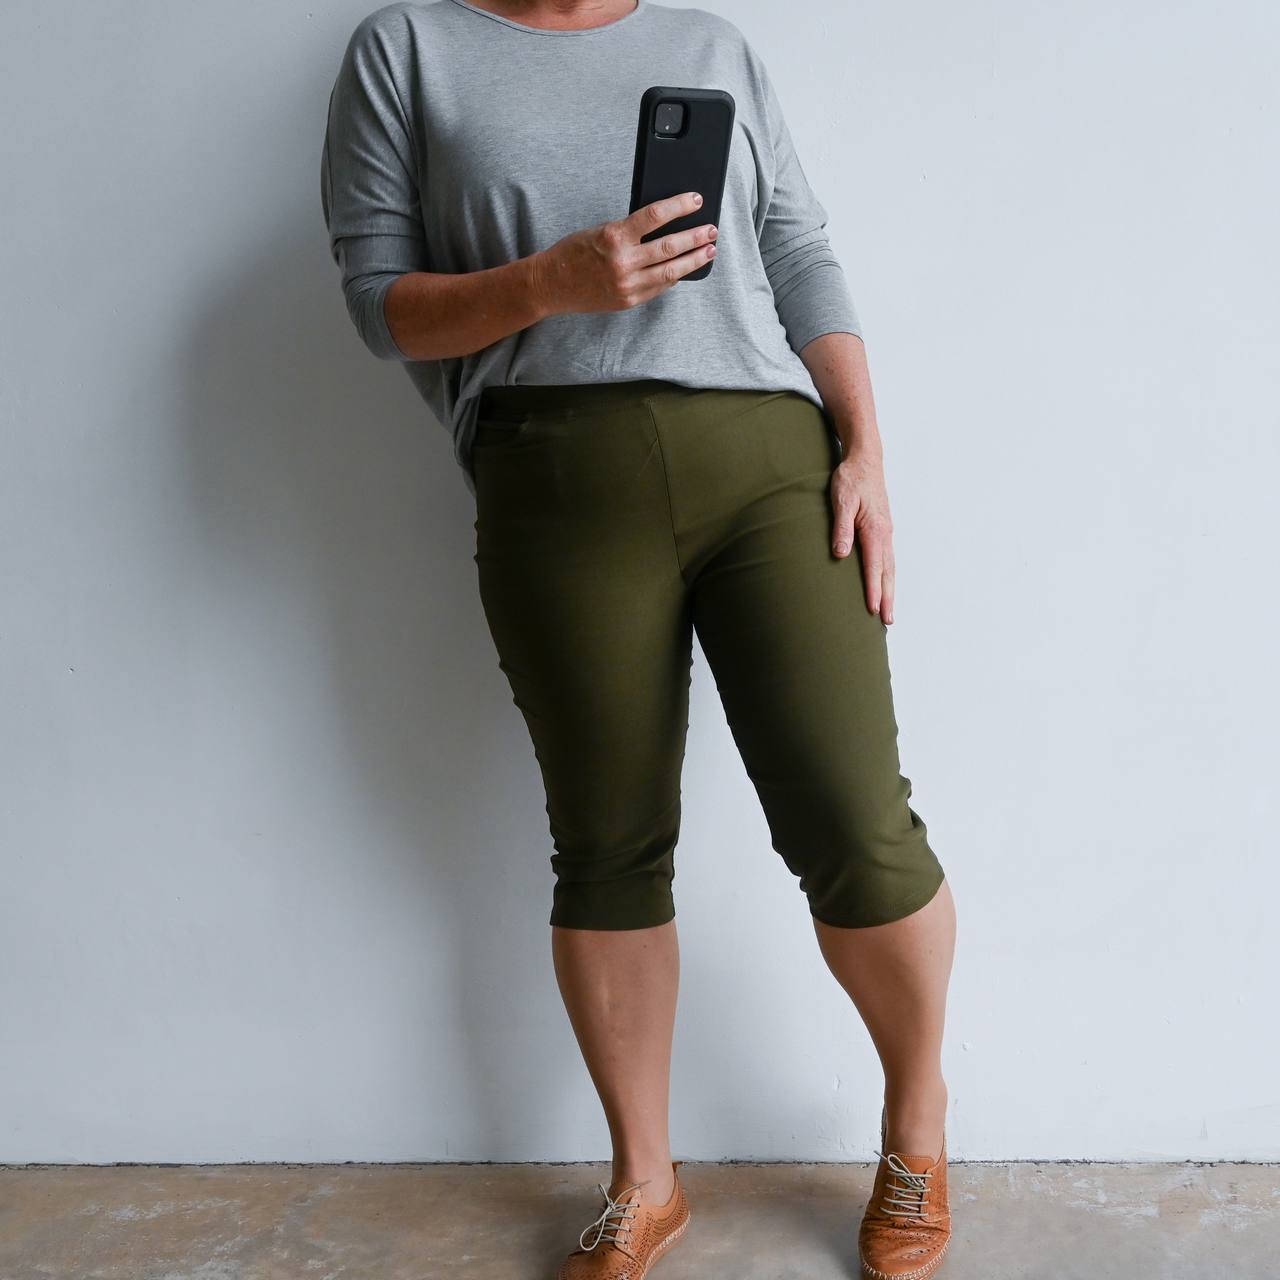 Fashion for Older Women: Capri Pants for the Summer Months, Sixty and Me